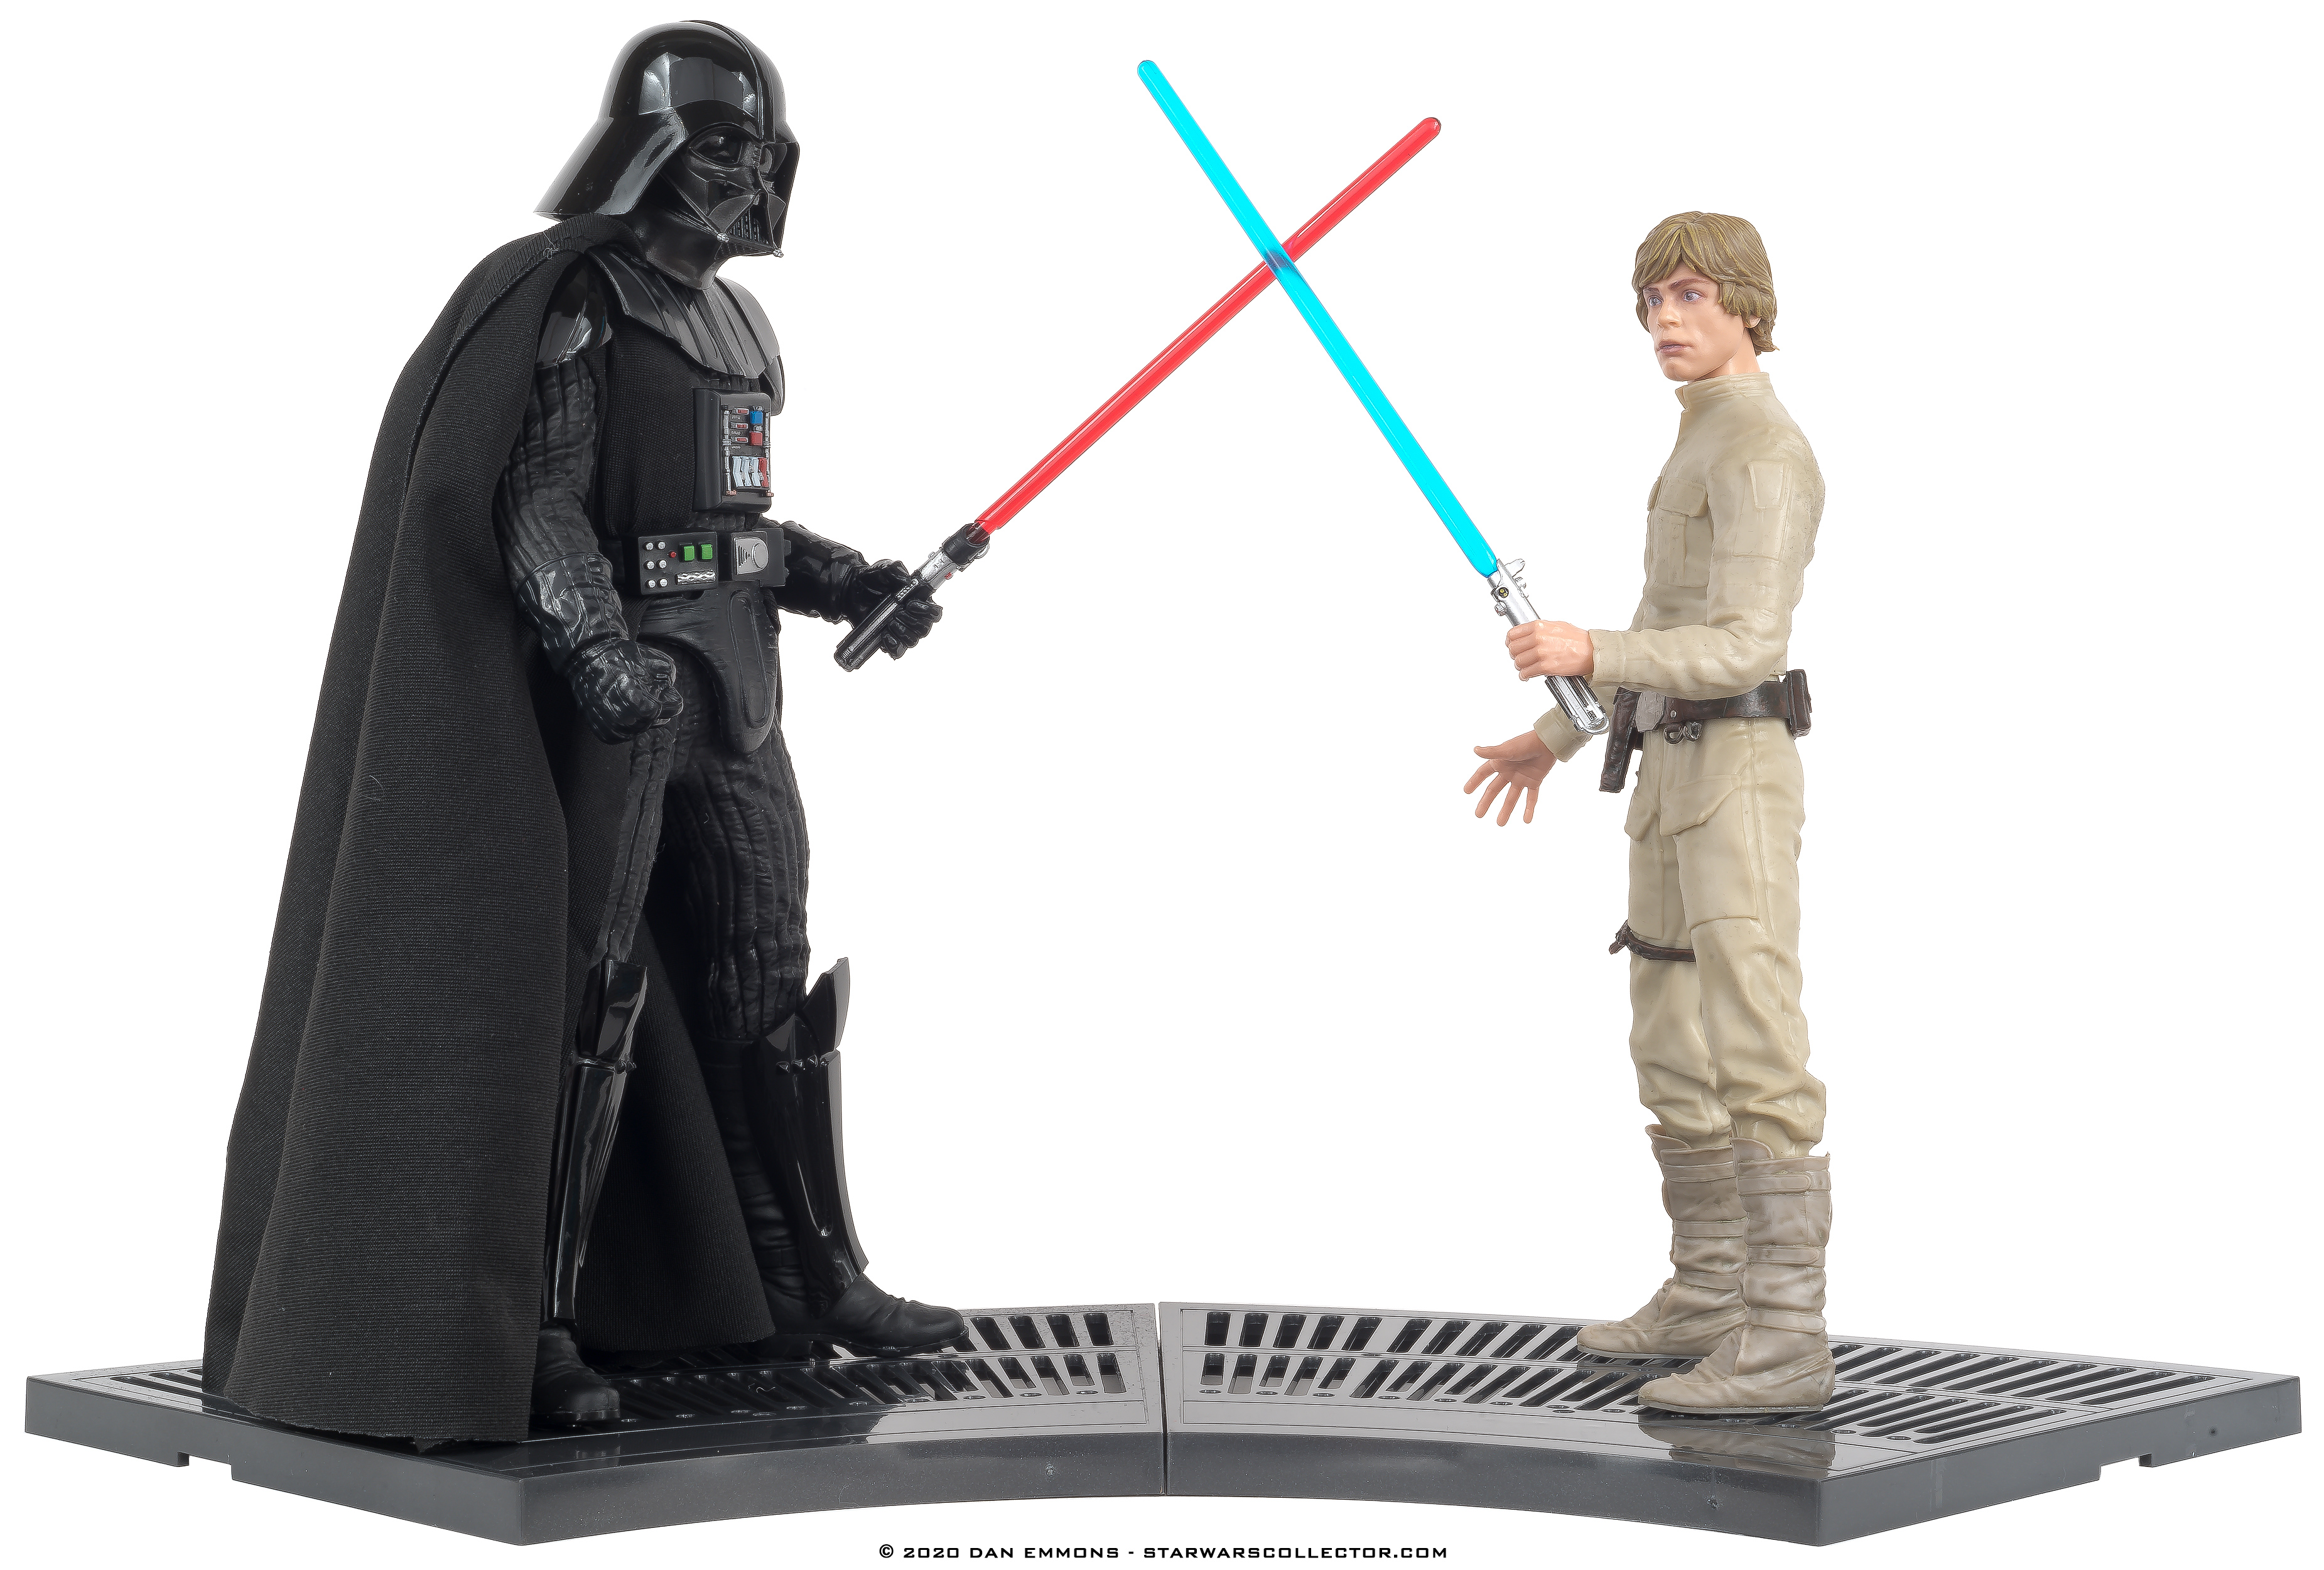 The Black Series 8-Inch Hyperreal: Darth Vader